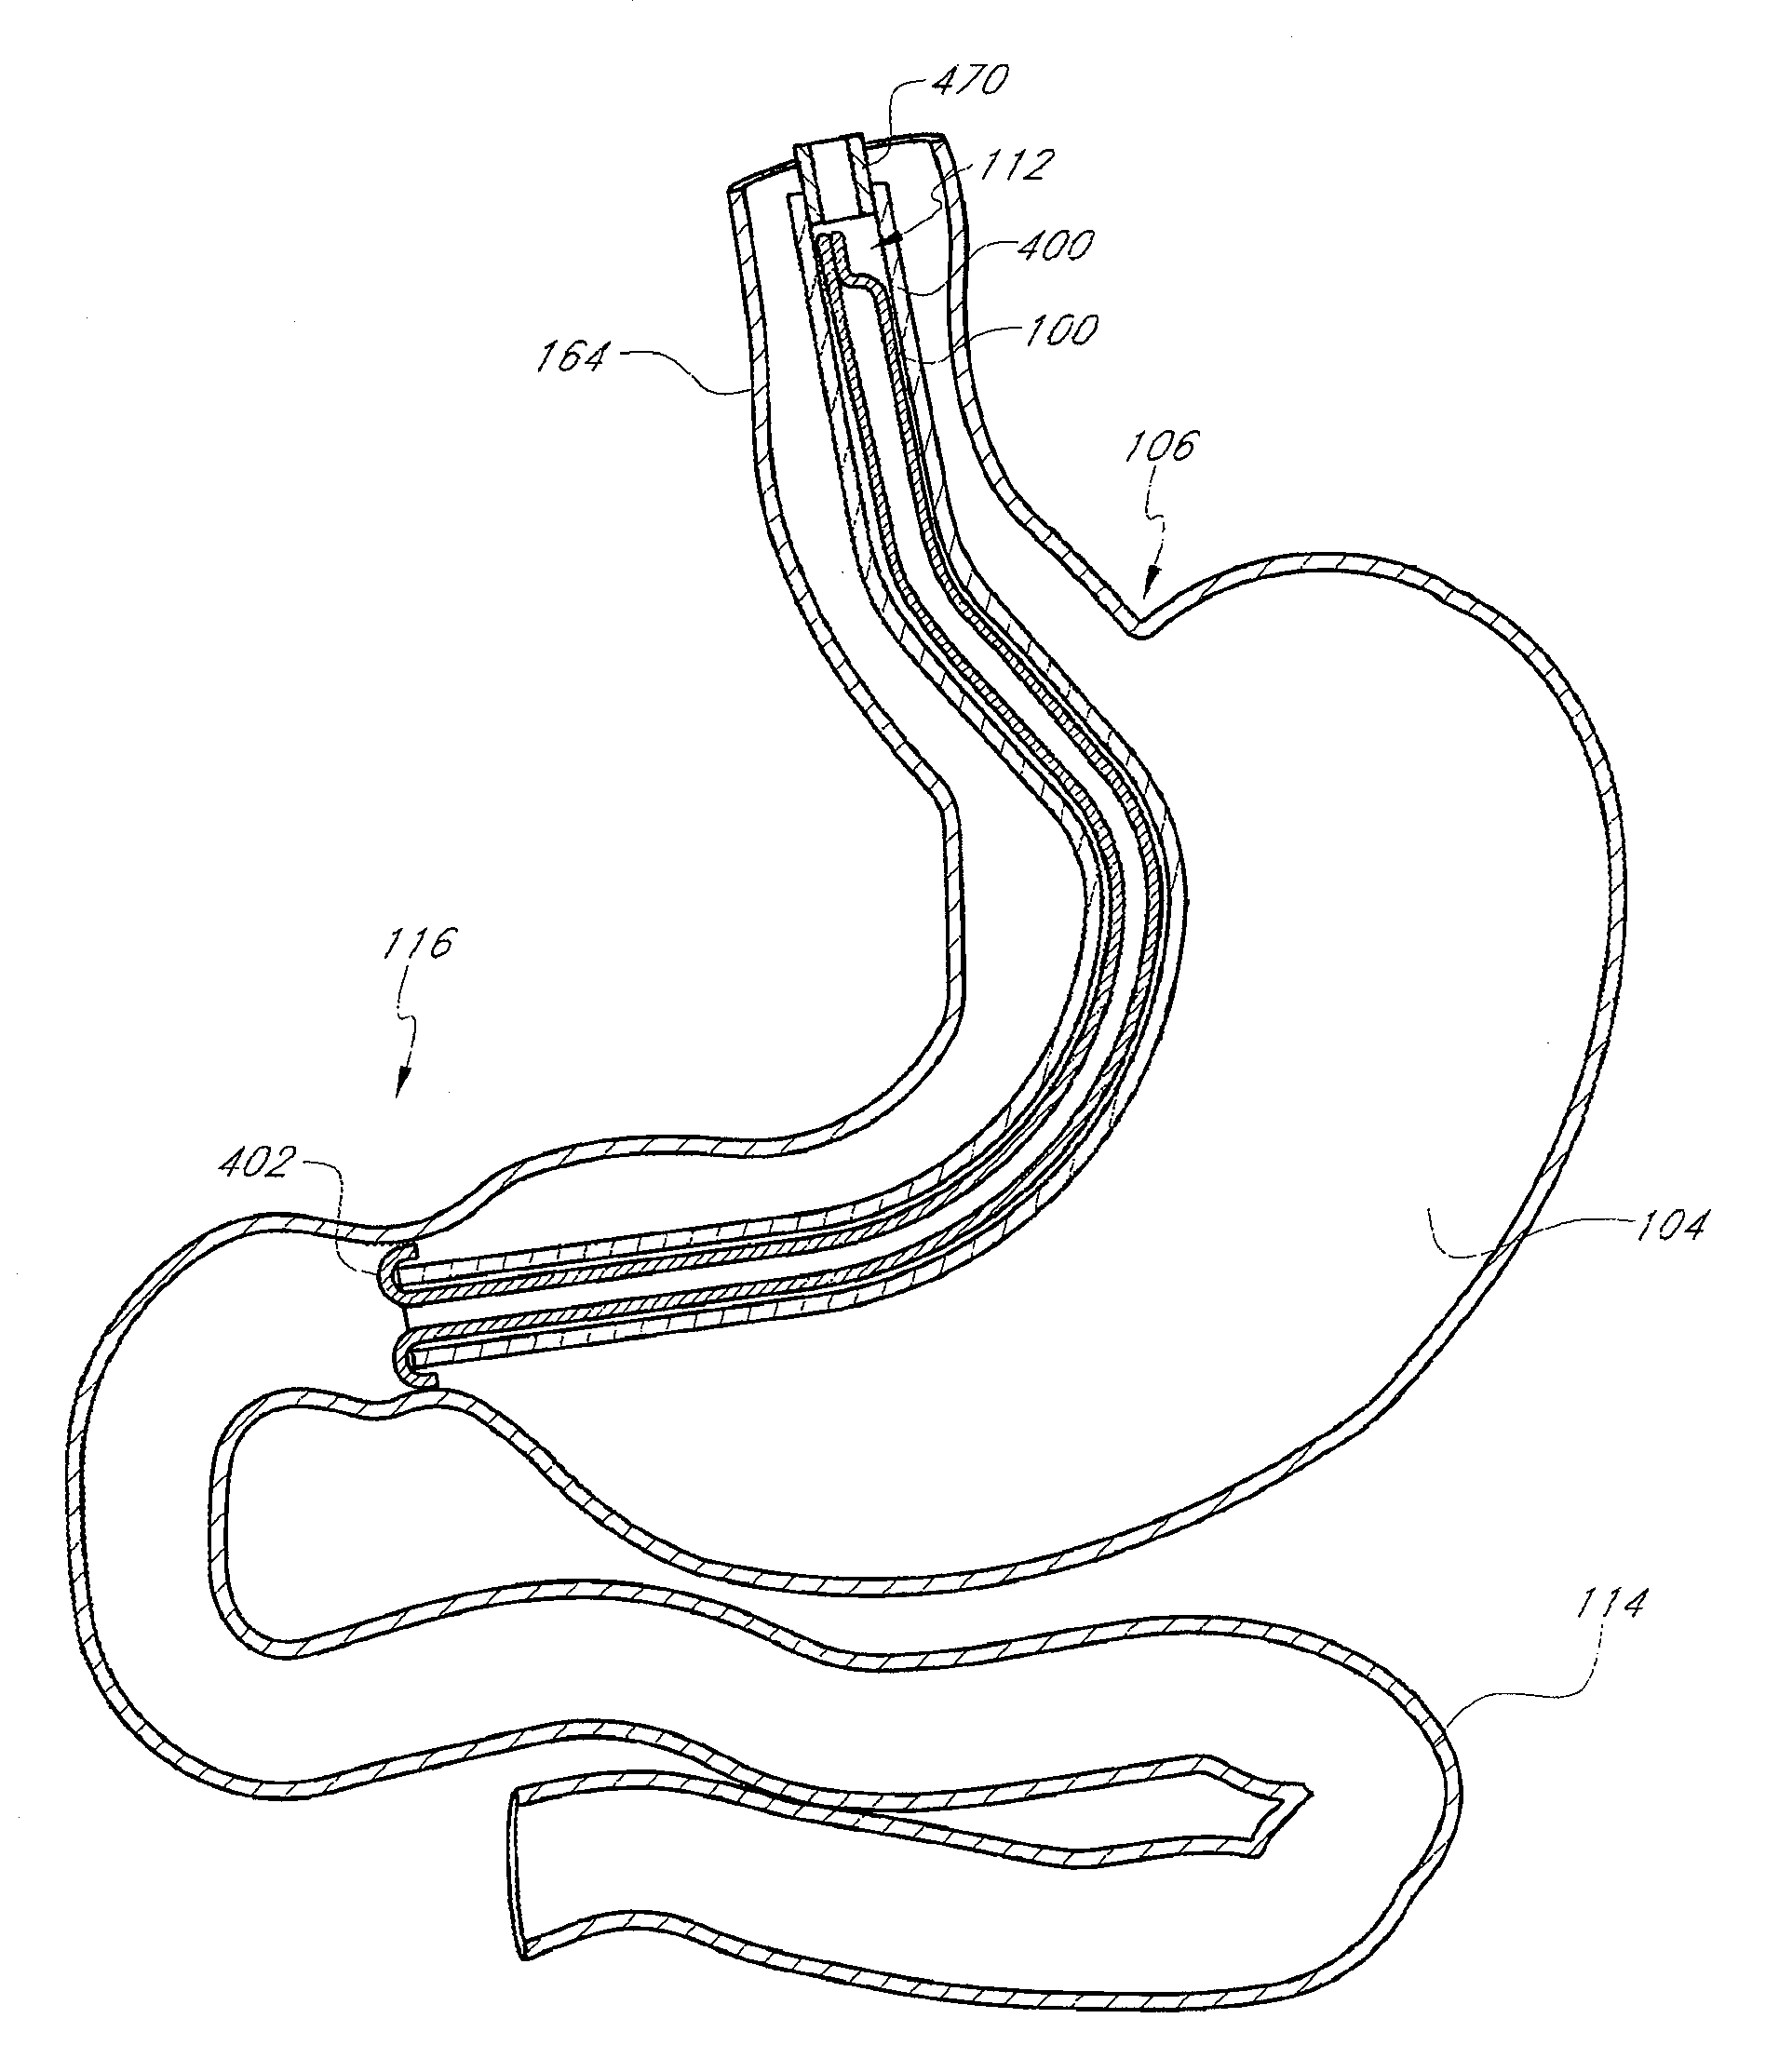 Methods for toposcopic sleeve delivery